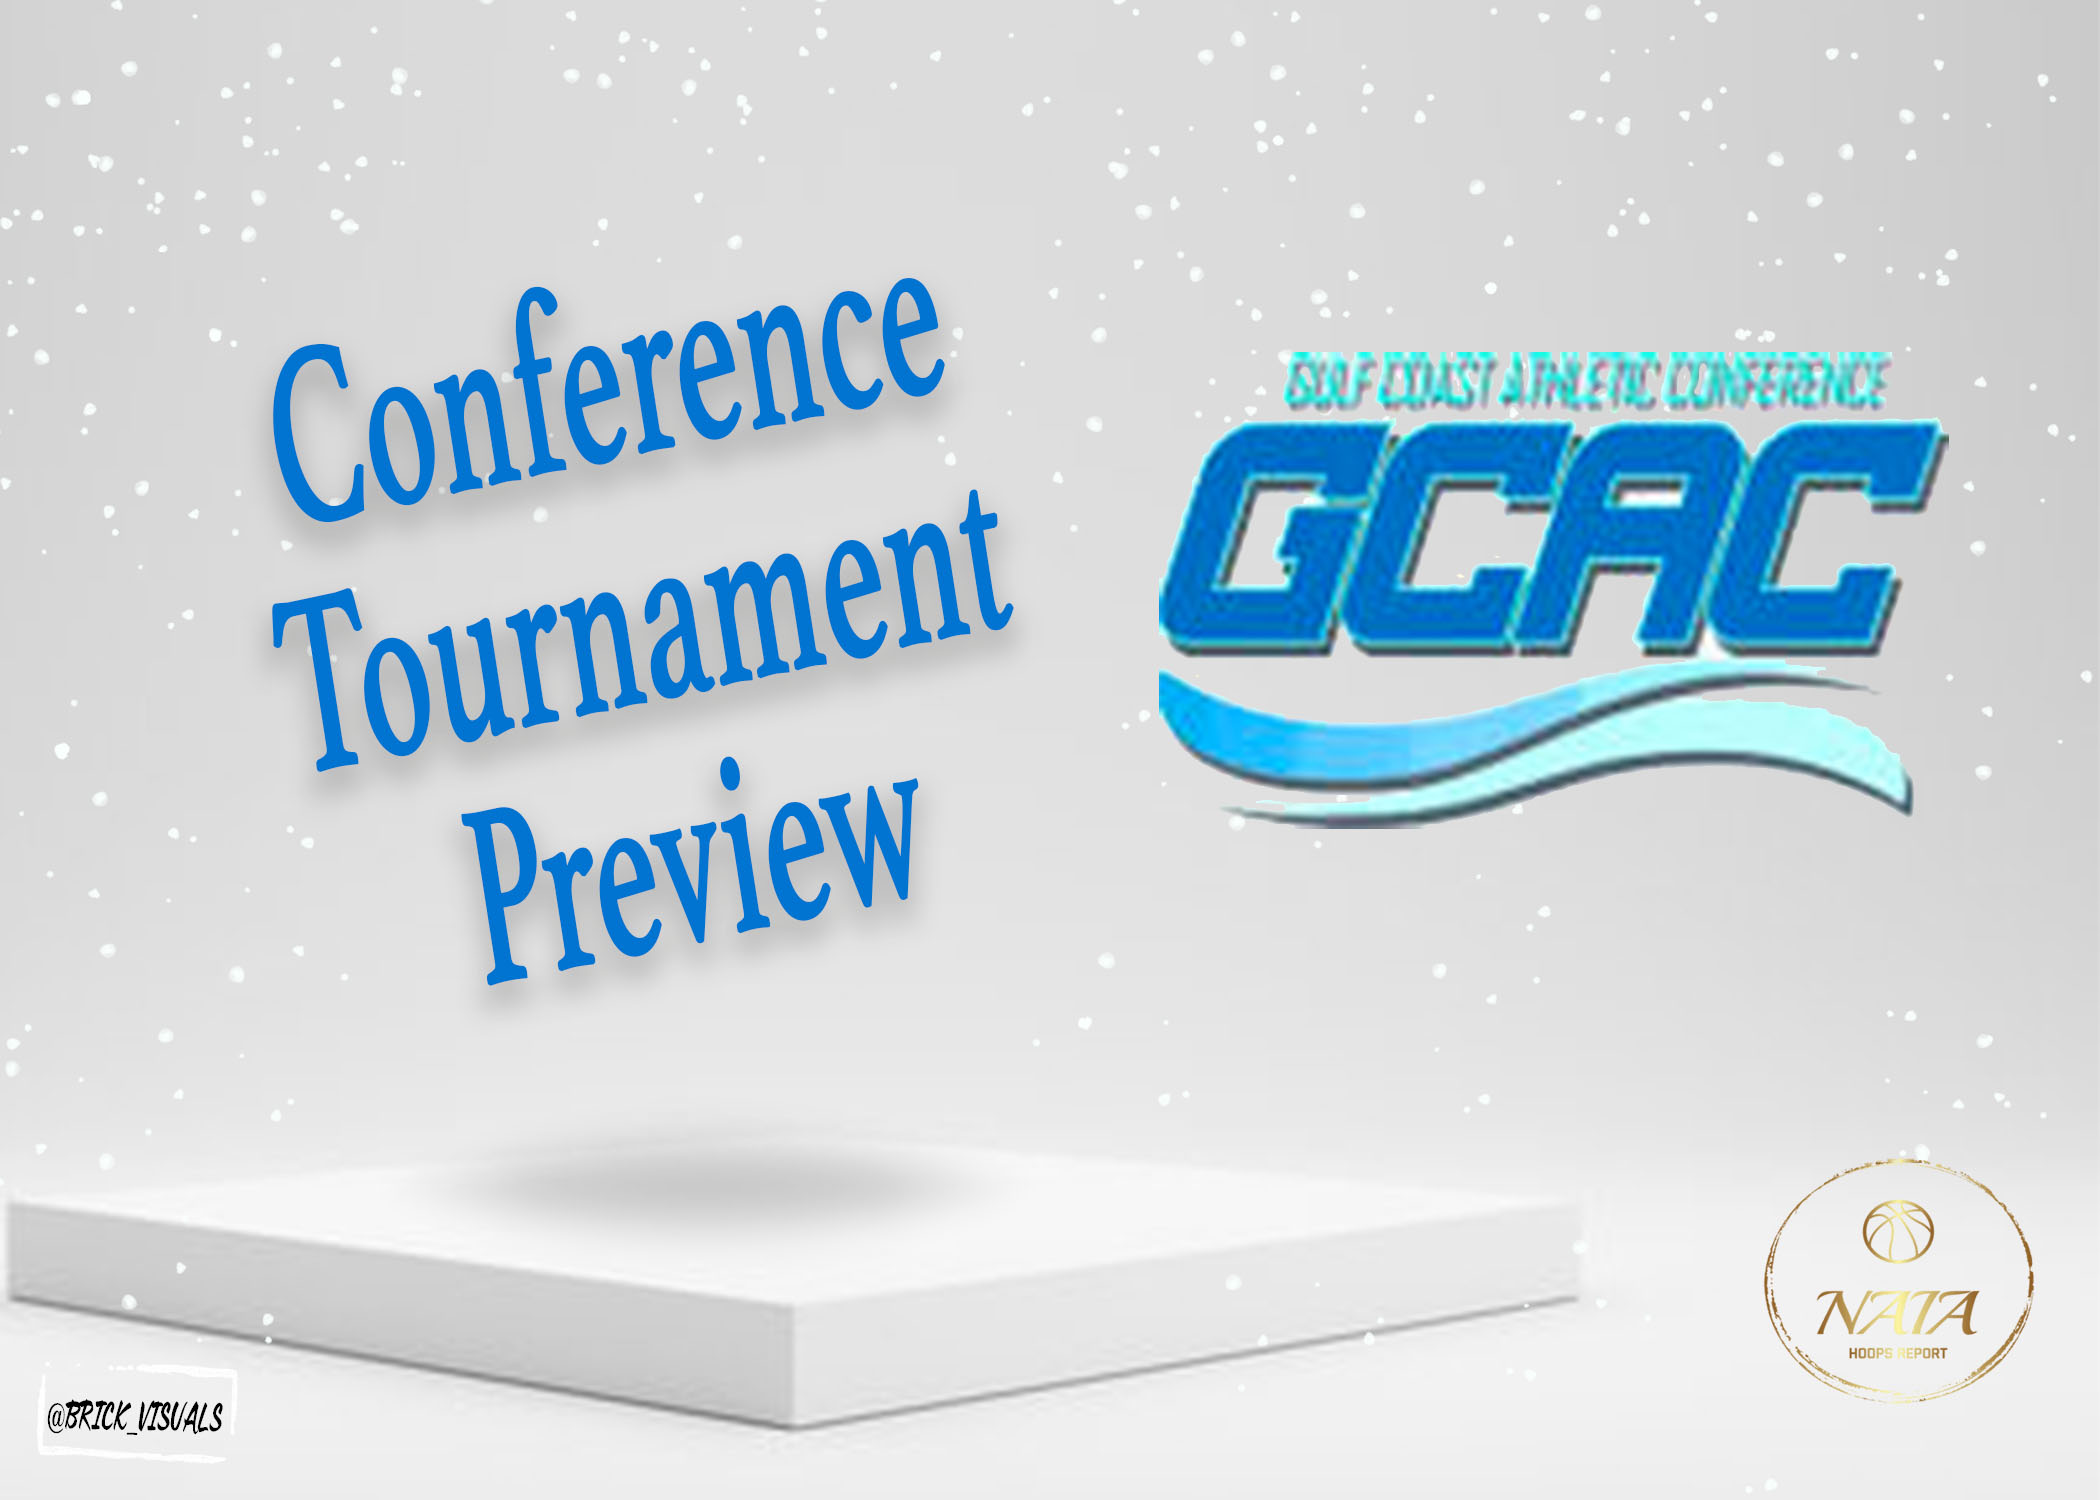 Gulf Coast Athletic Conference Tournament Preview